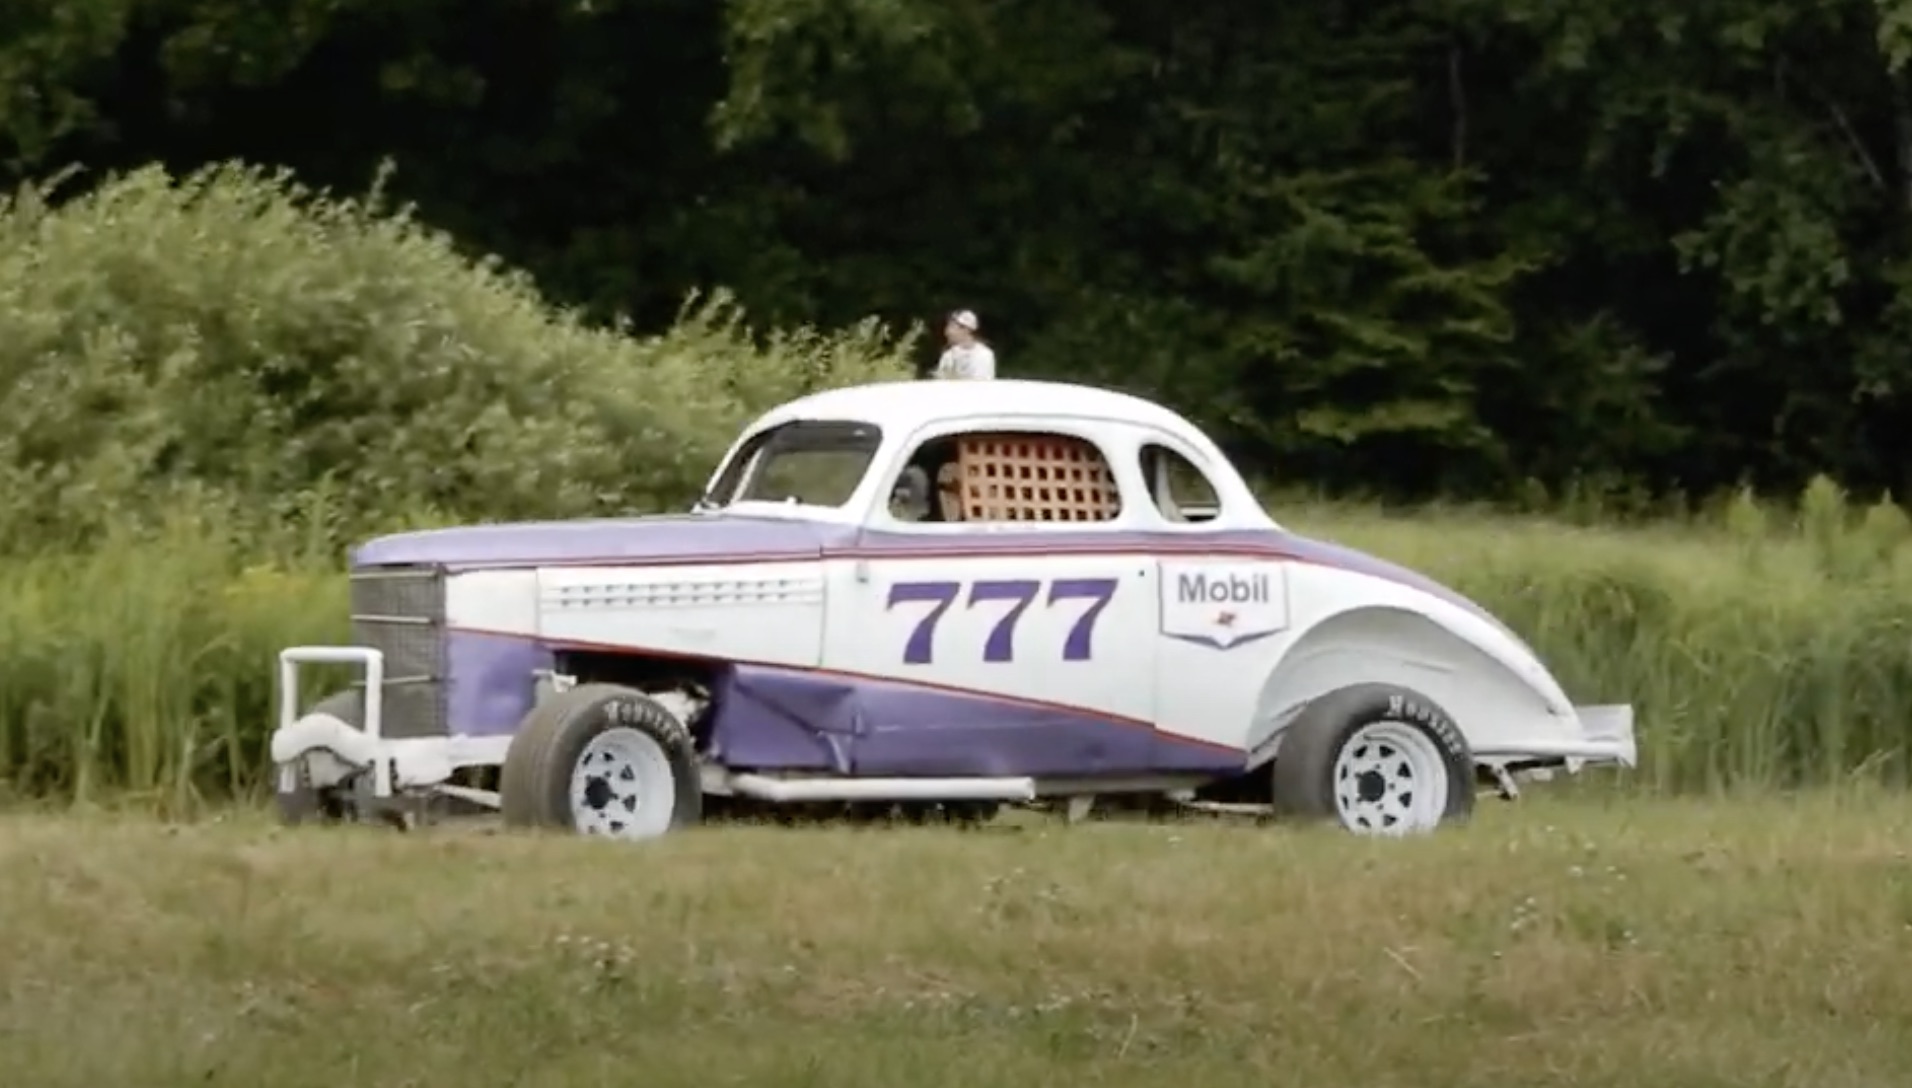 History In Action: Vice Grip Garage Takes The 1938 Chevrolet Racer Out For Laps!